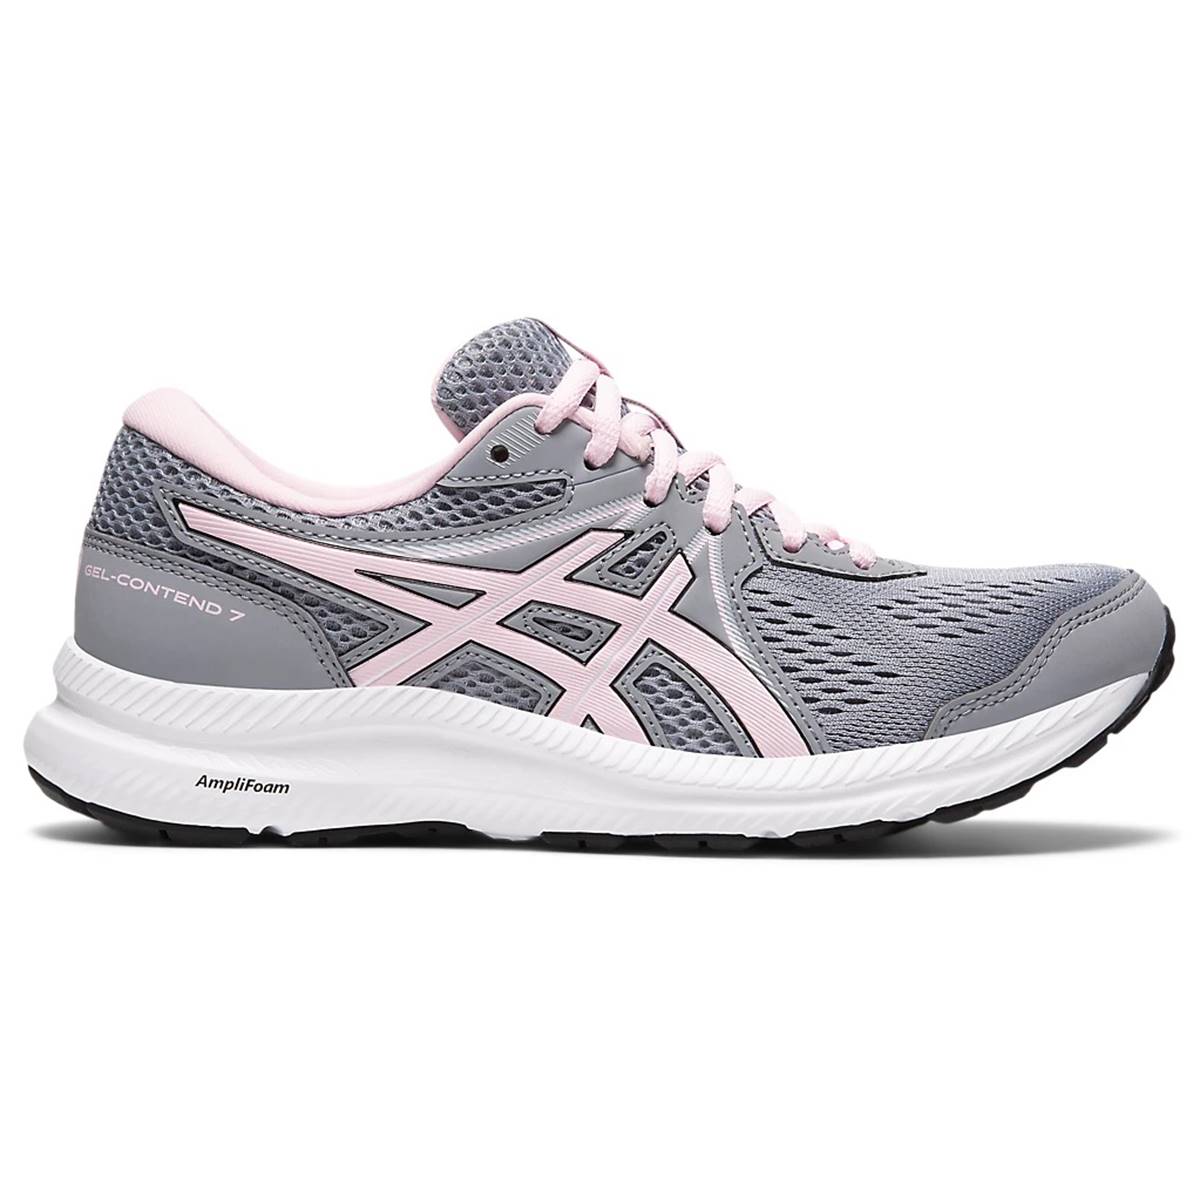 Womens Asics Gel-Contend 7 Athletic Sneakers